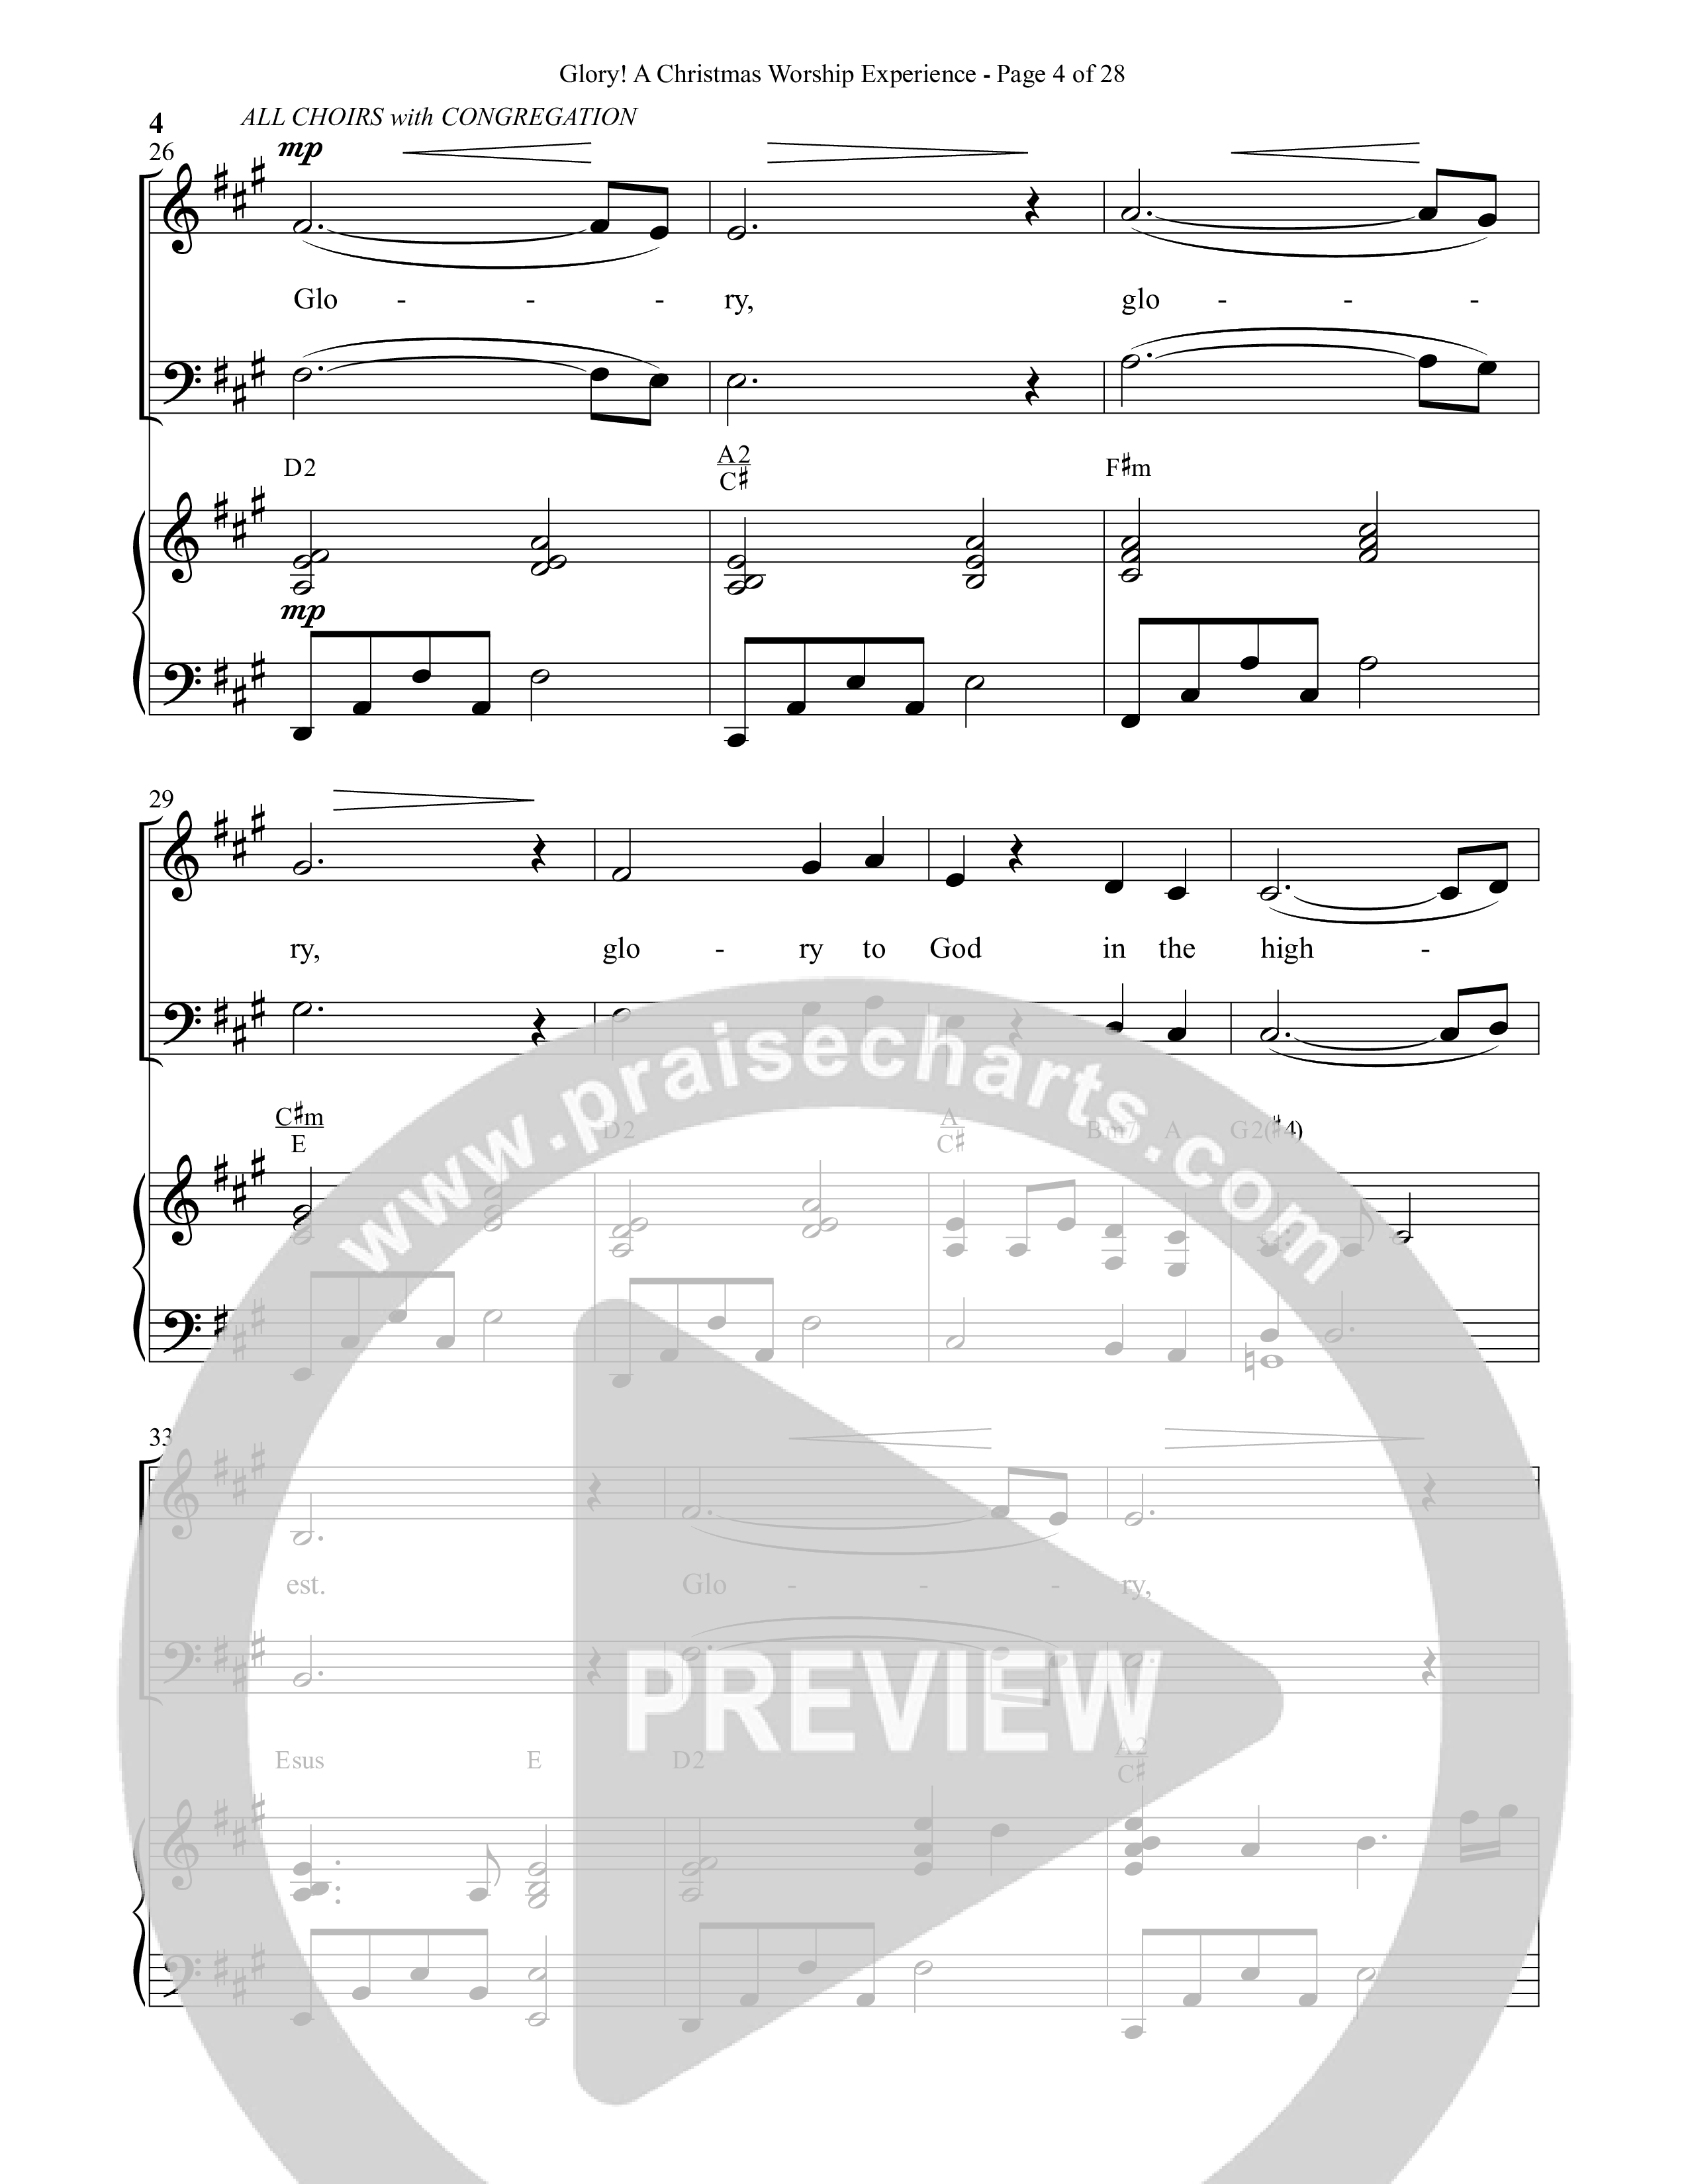 Glory: A Christmas Worship Experience (Choral Anthem SATB) Anthem (SATB/Piano) (Semsen Music / Arr. John Bolin / Orch. Cliff Duren)